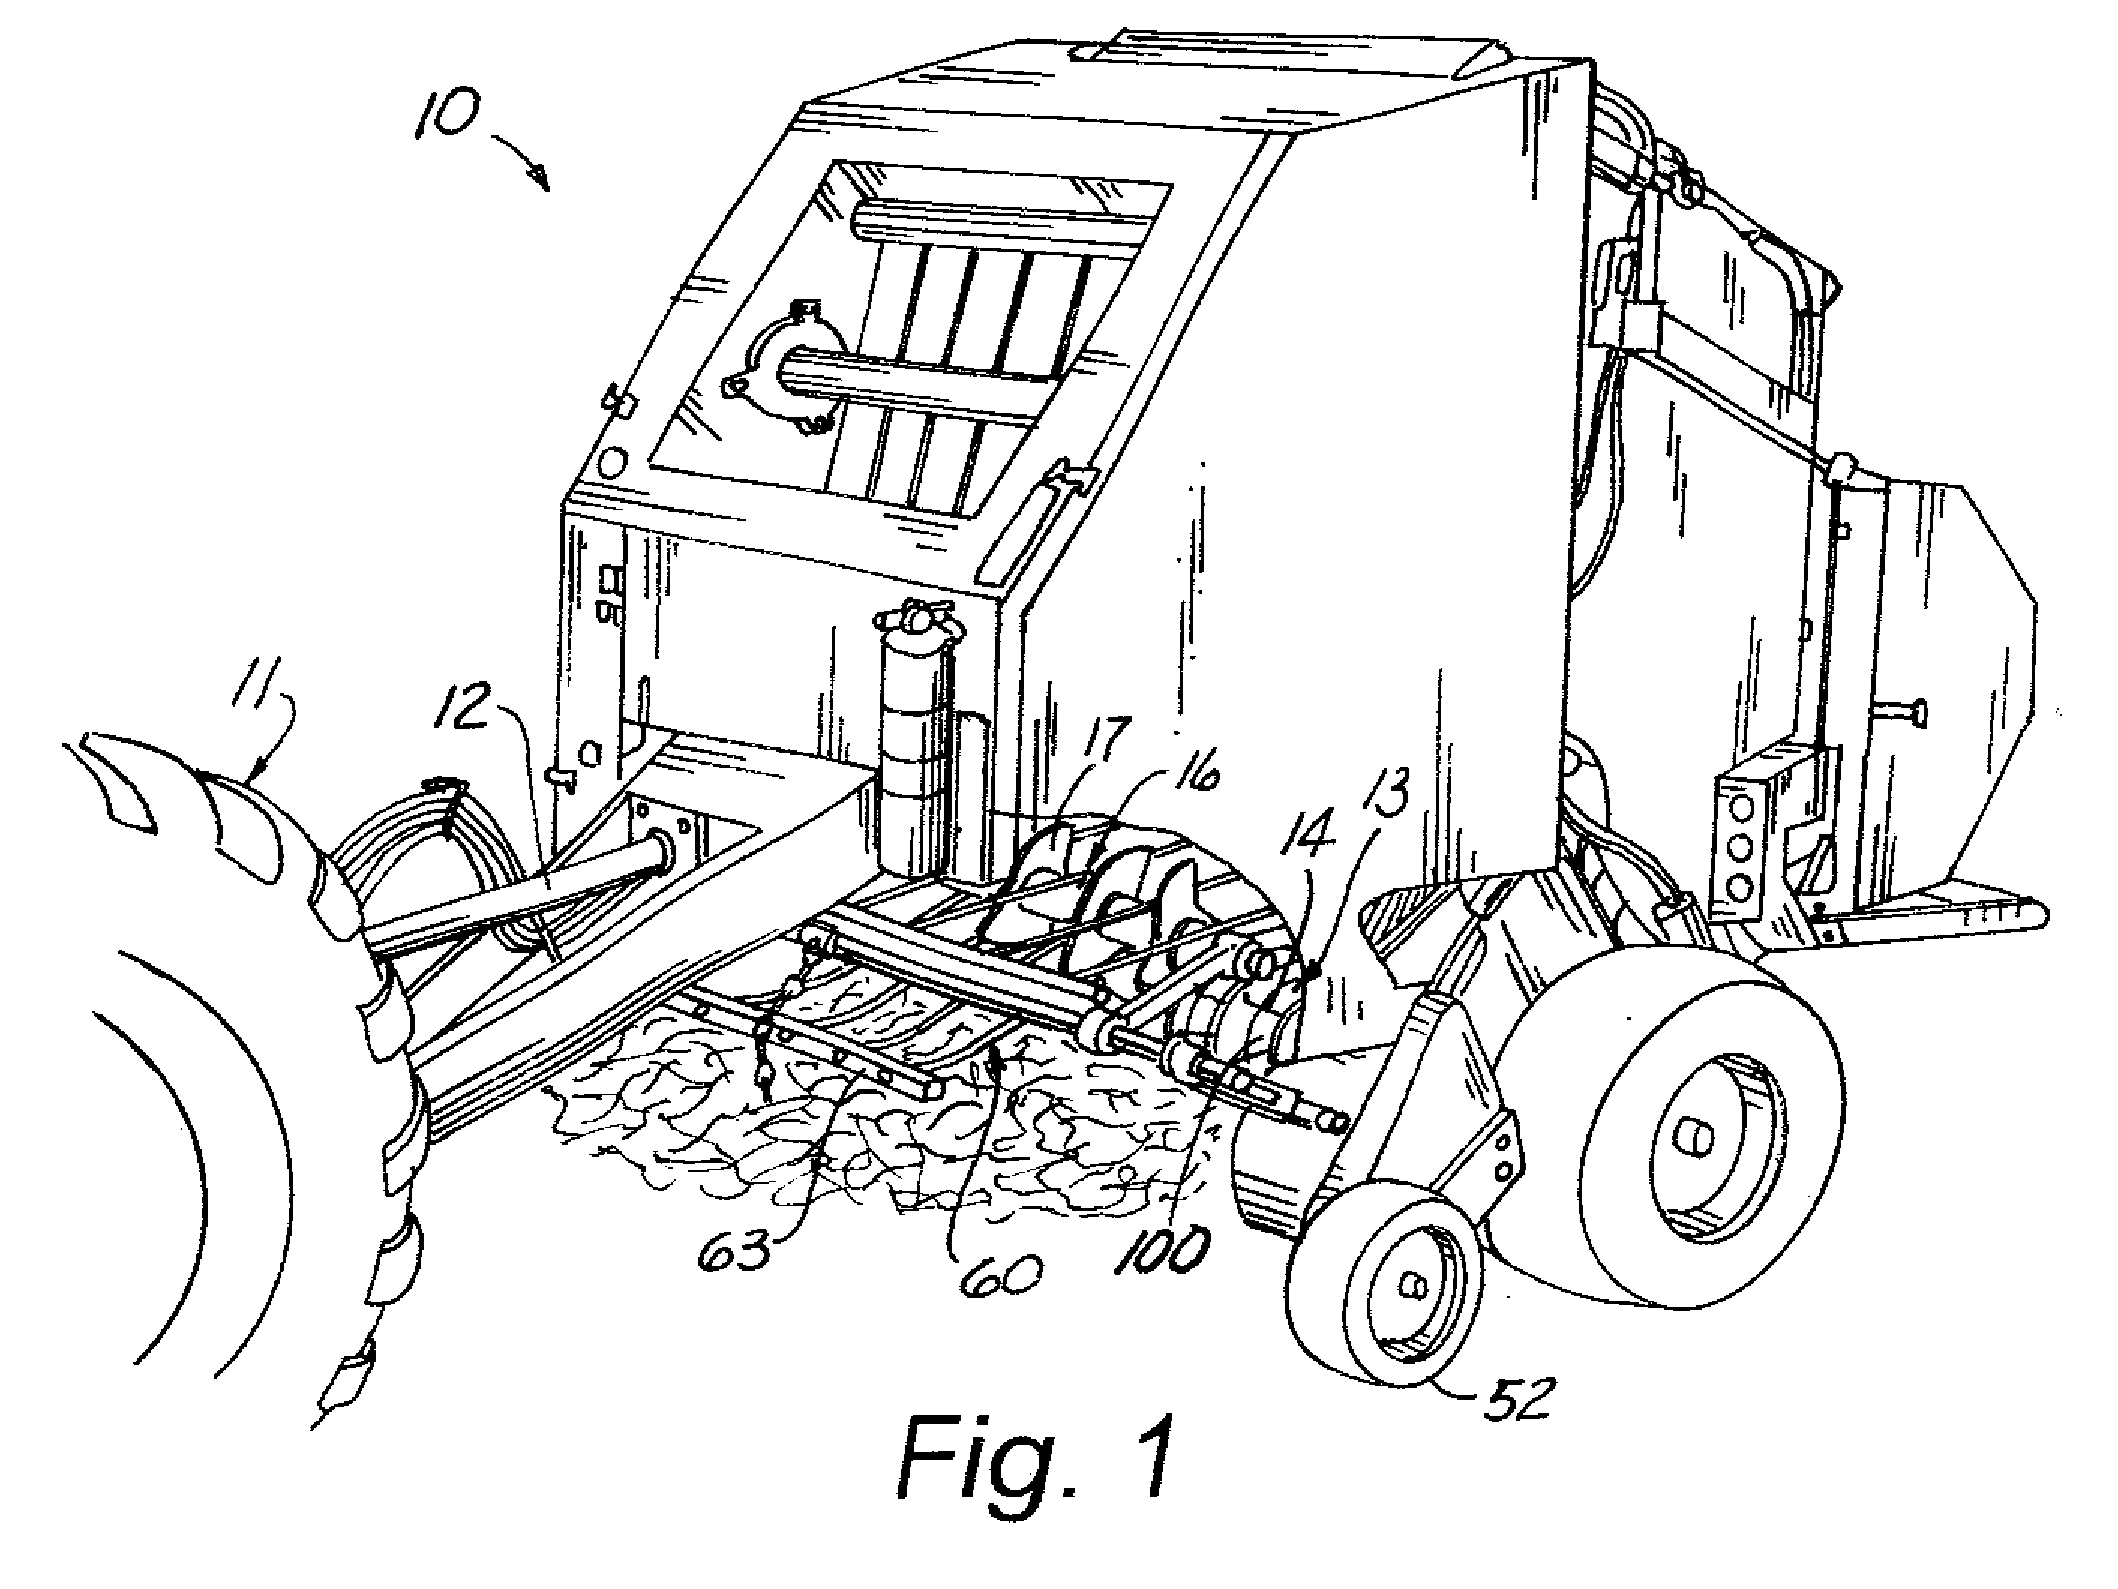 Plastic Bands or Plastic Covers for Bands Located Between Tines on a Crop Pickup Apparatus